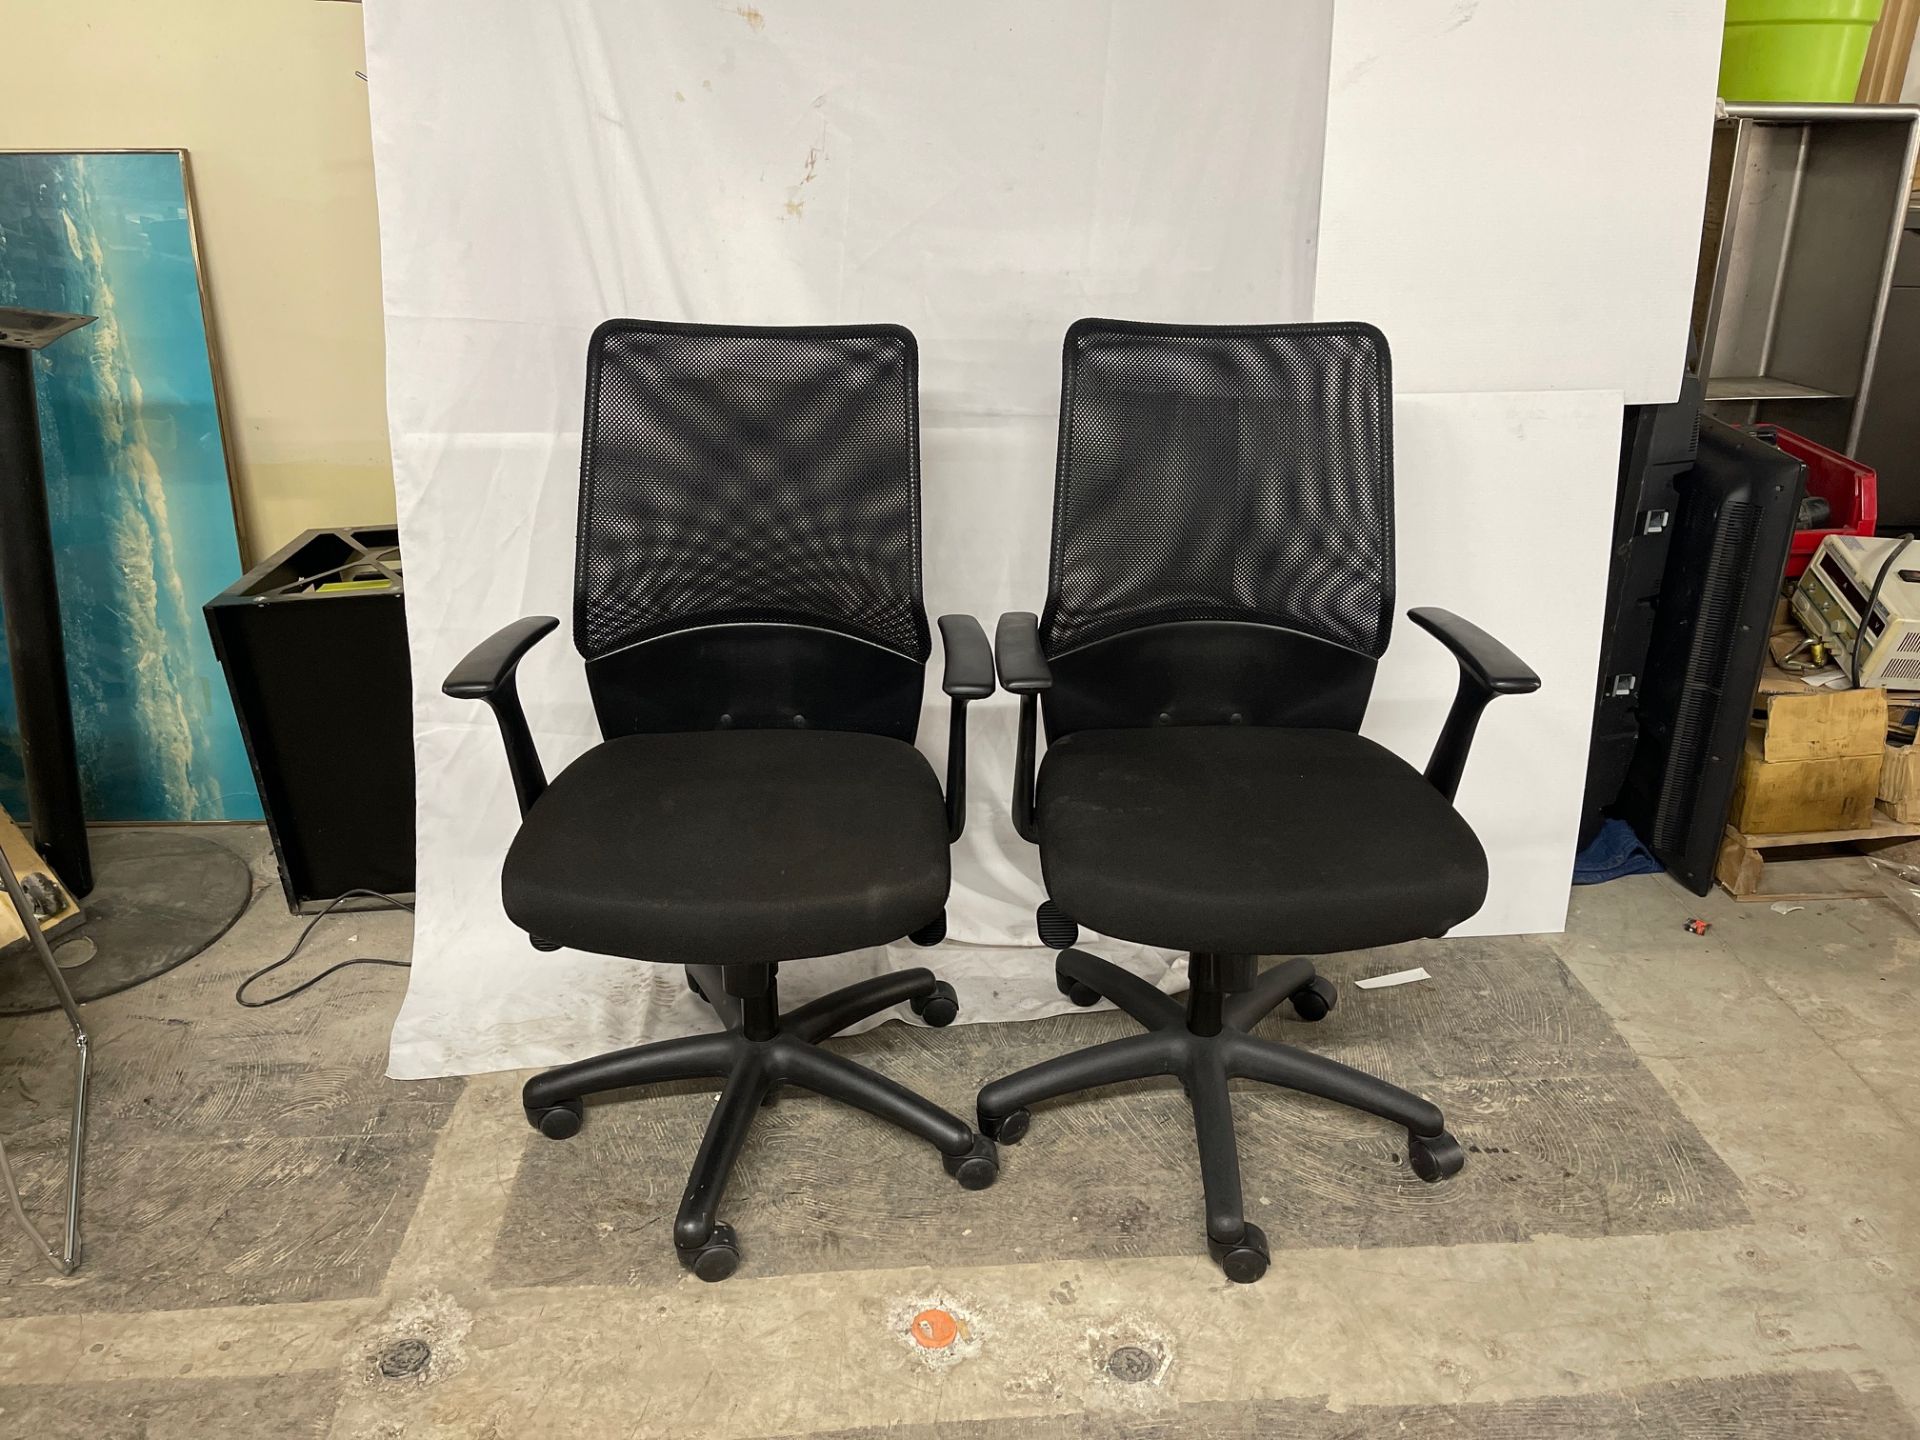 TASK CHAIRS